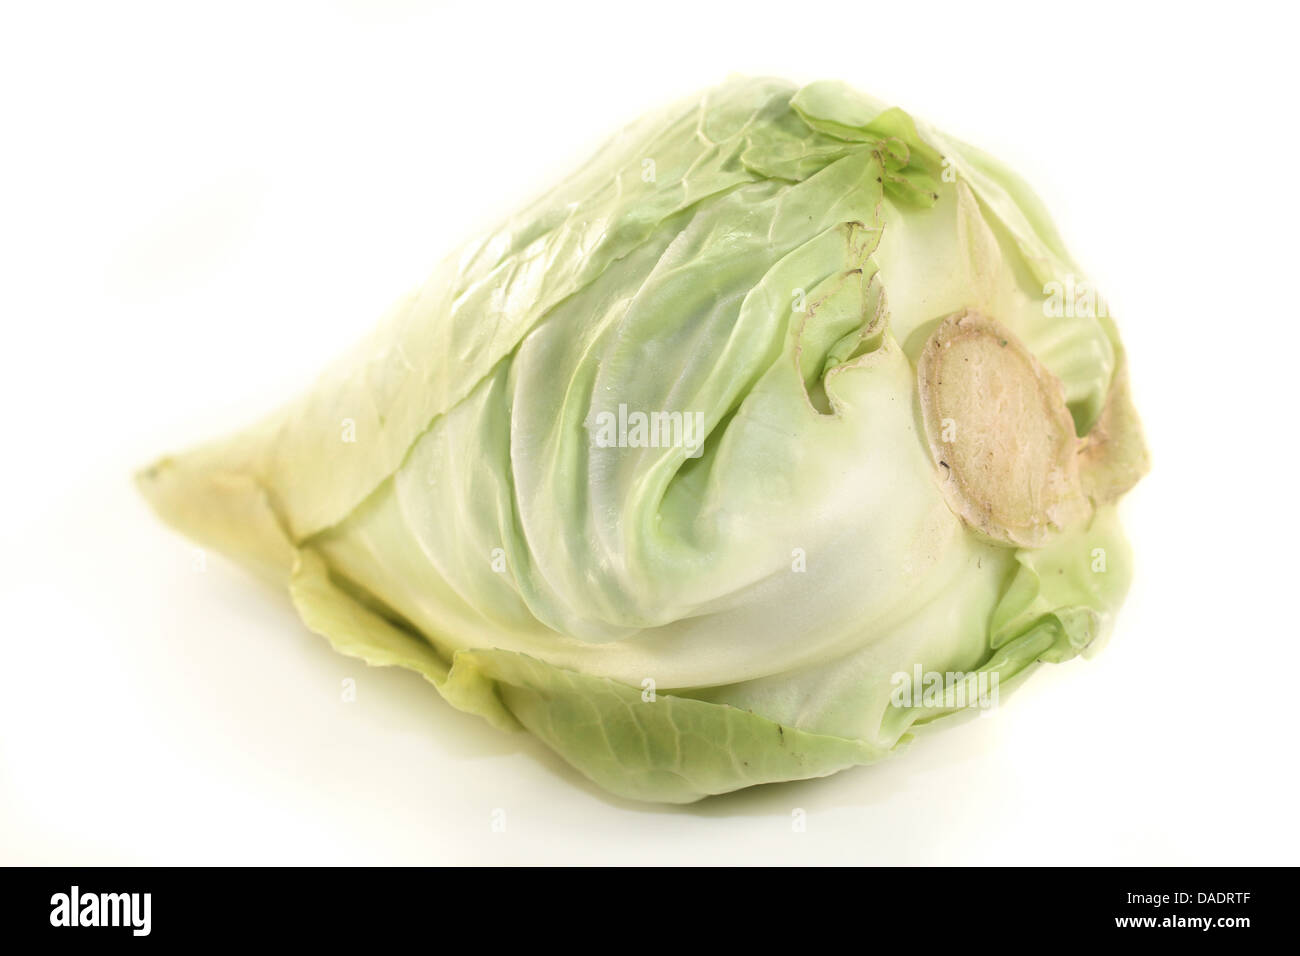 a raw cabbage against white background Stock Photo